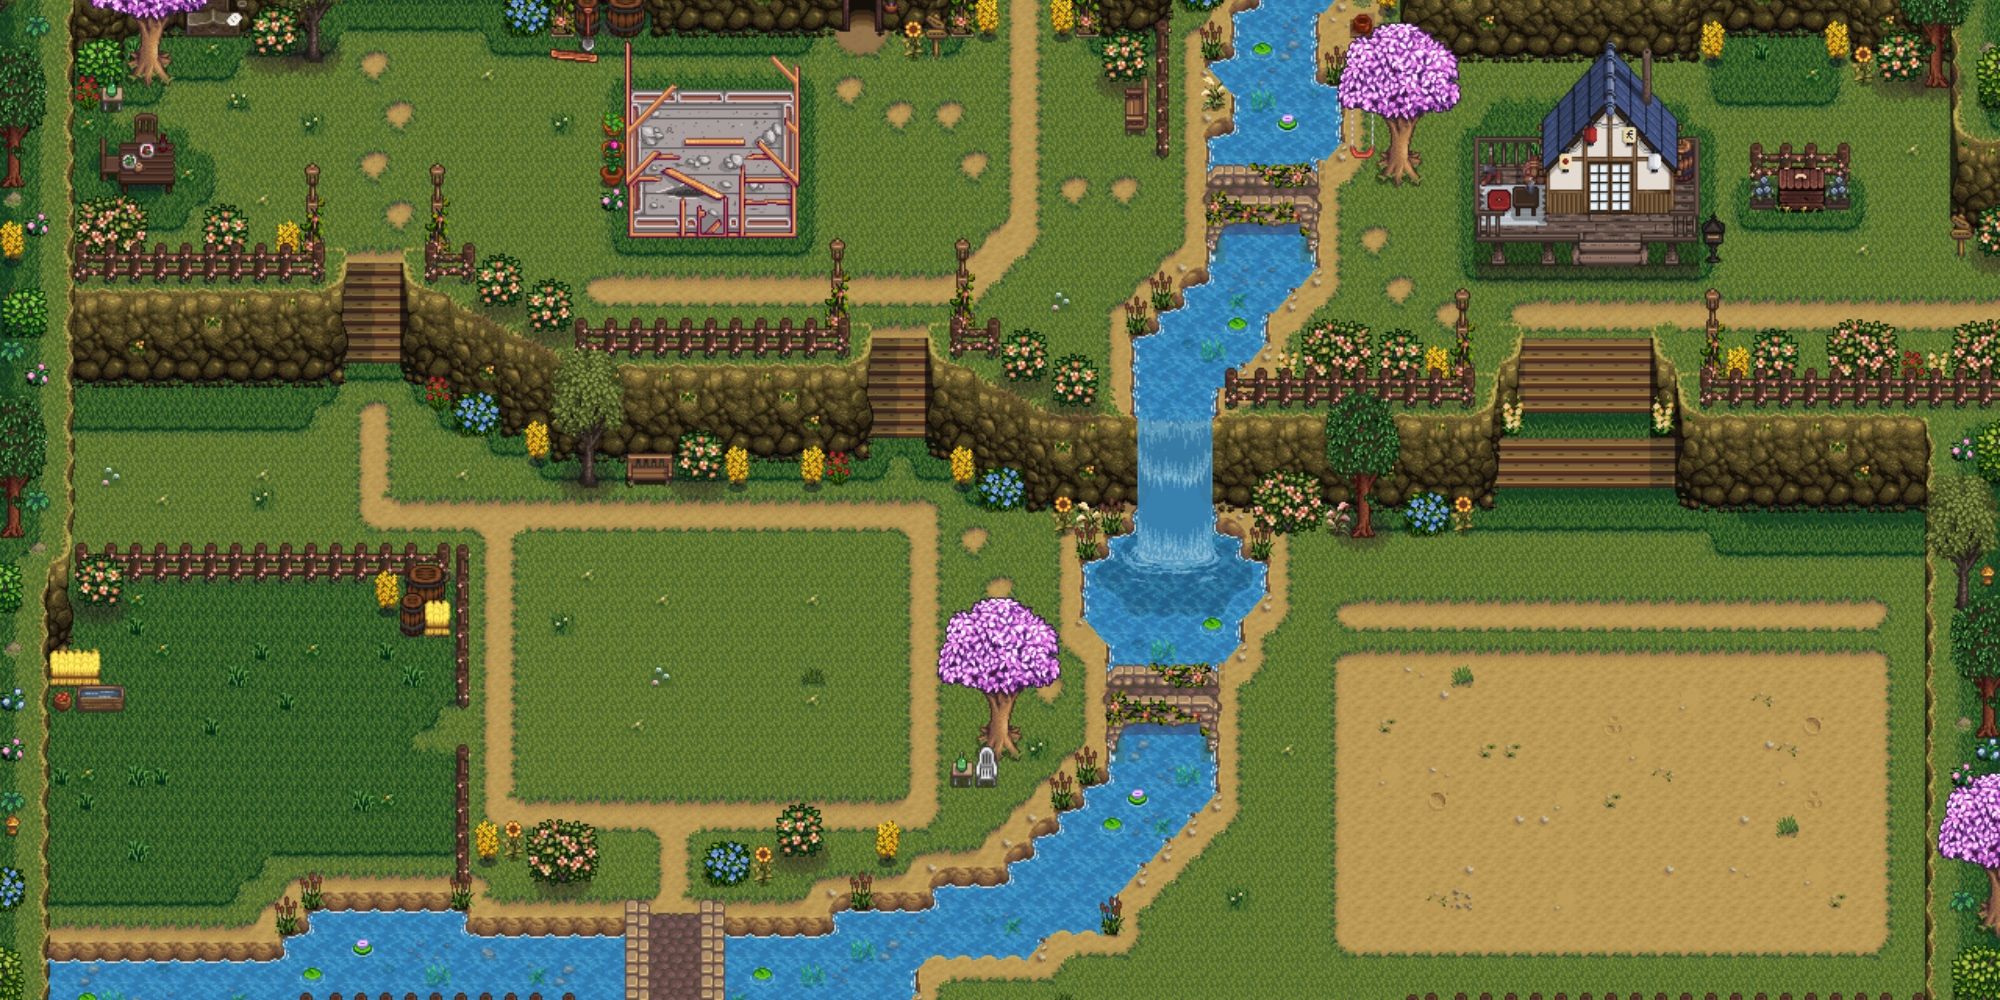 A simple Stardew Valley farm map that has separate plots for the crops and a winding river in the middle